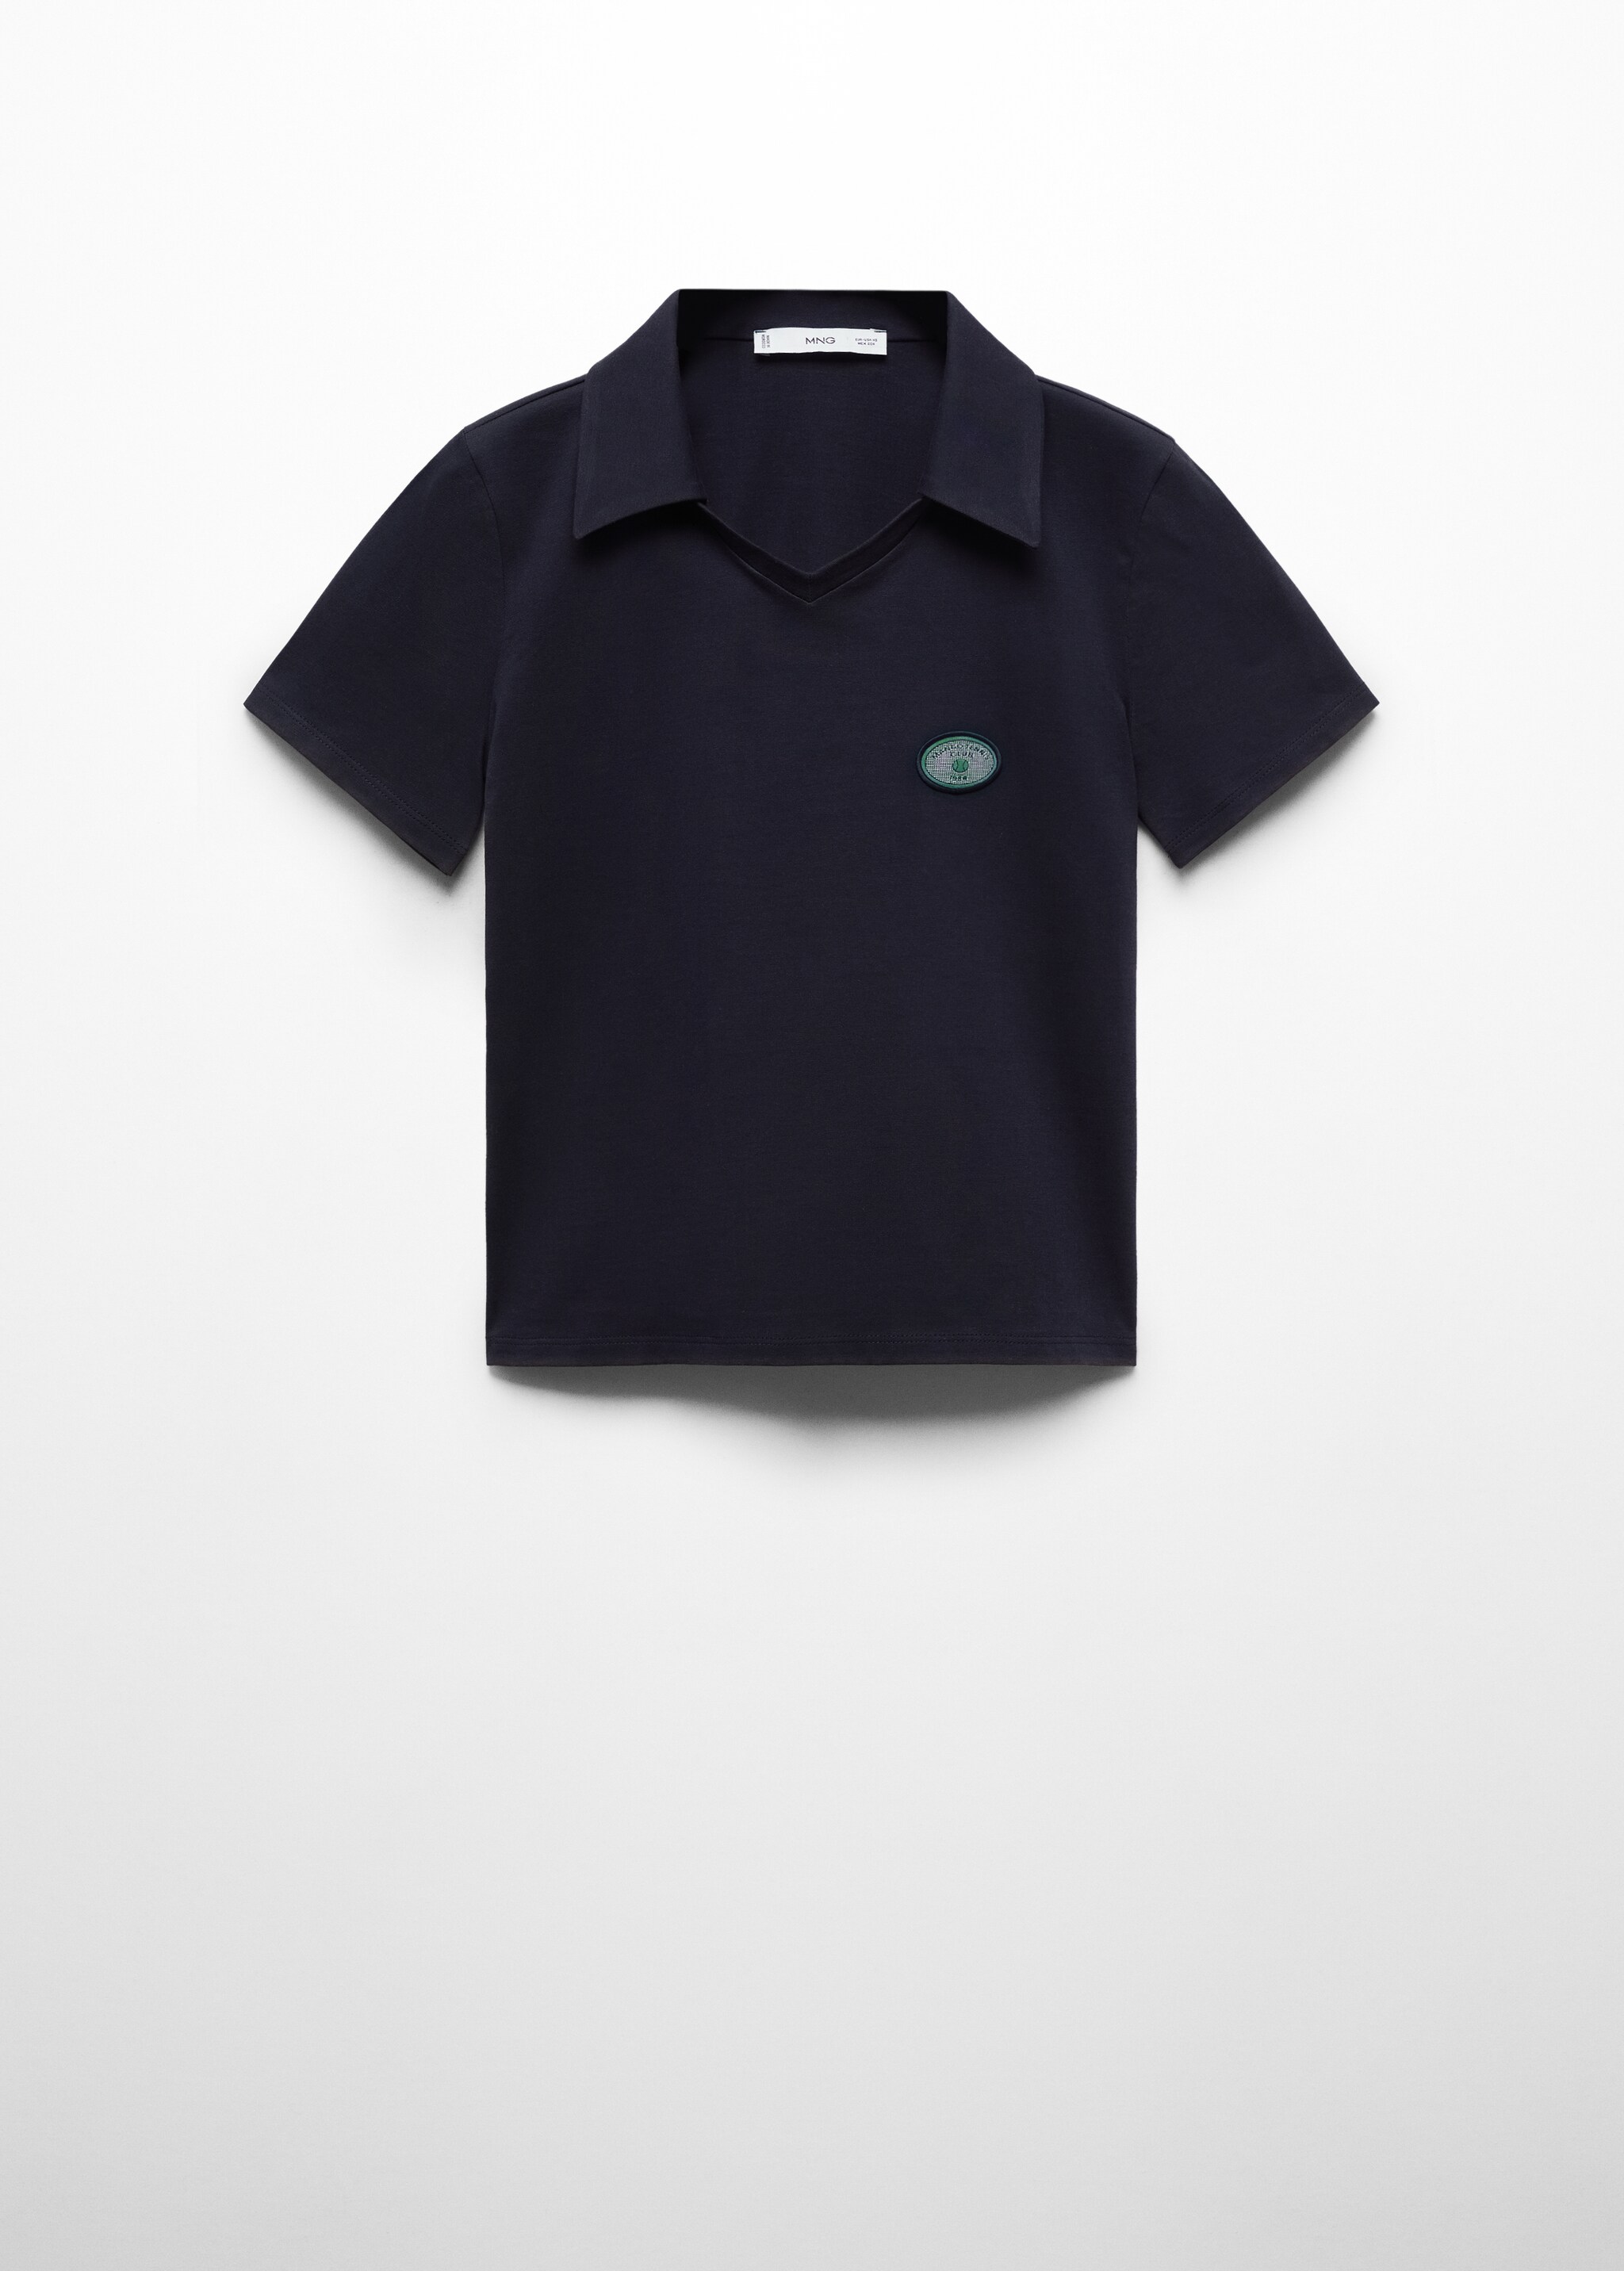 100% cotton polo shirt with logo - Article without model